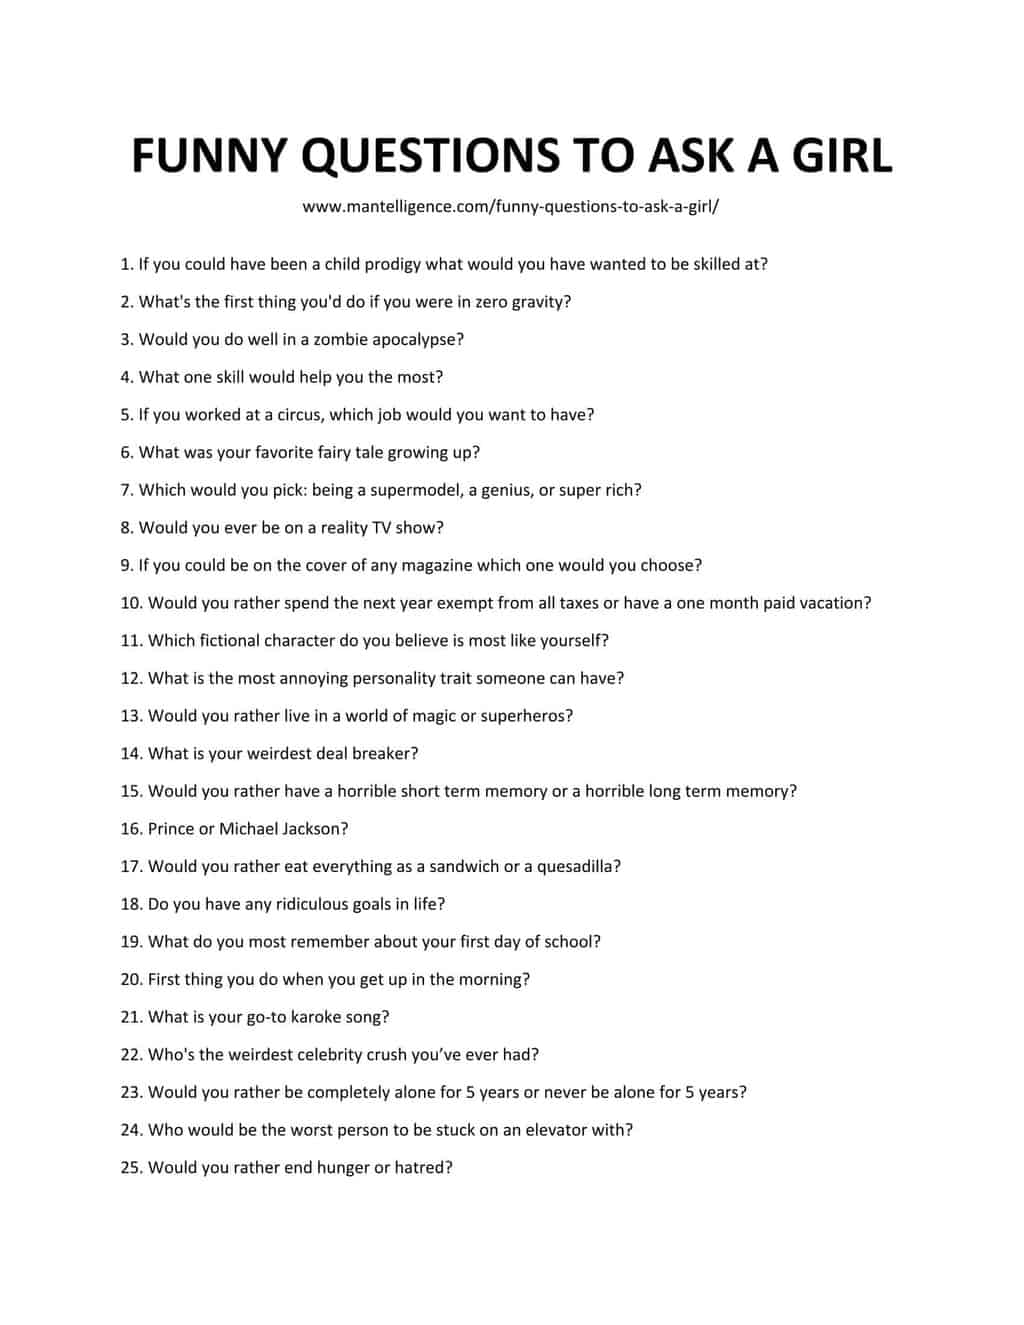 FUNNY QUESTIONS TO ASK A GIRL 